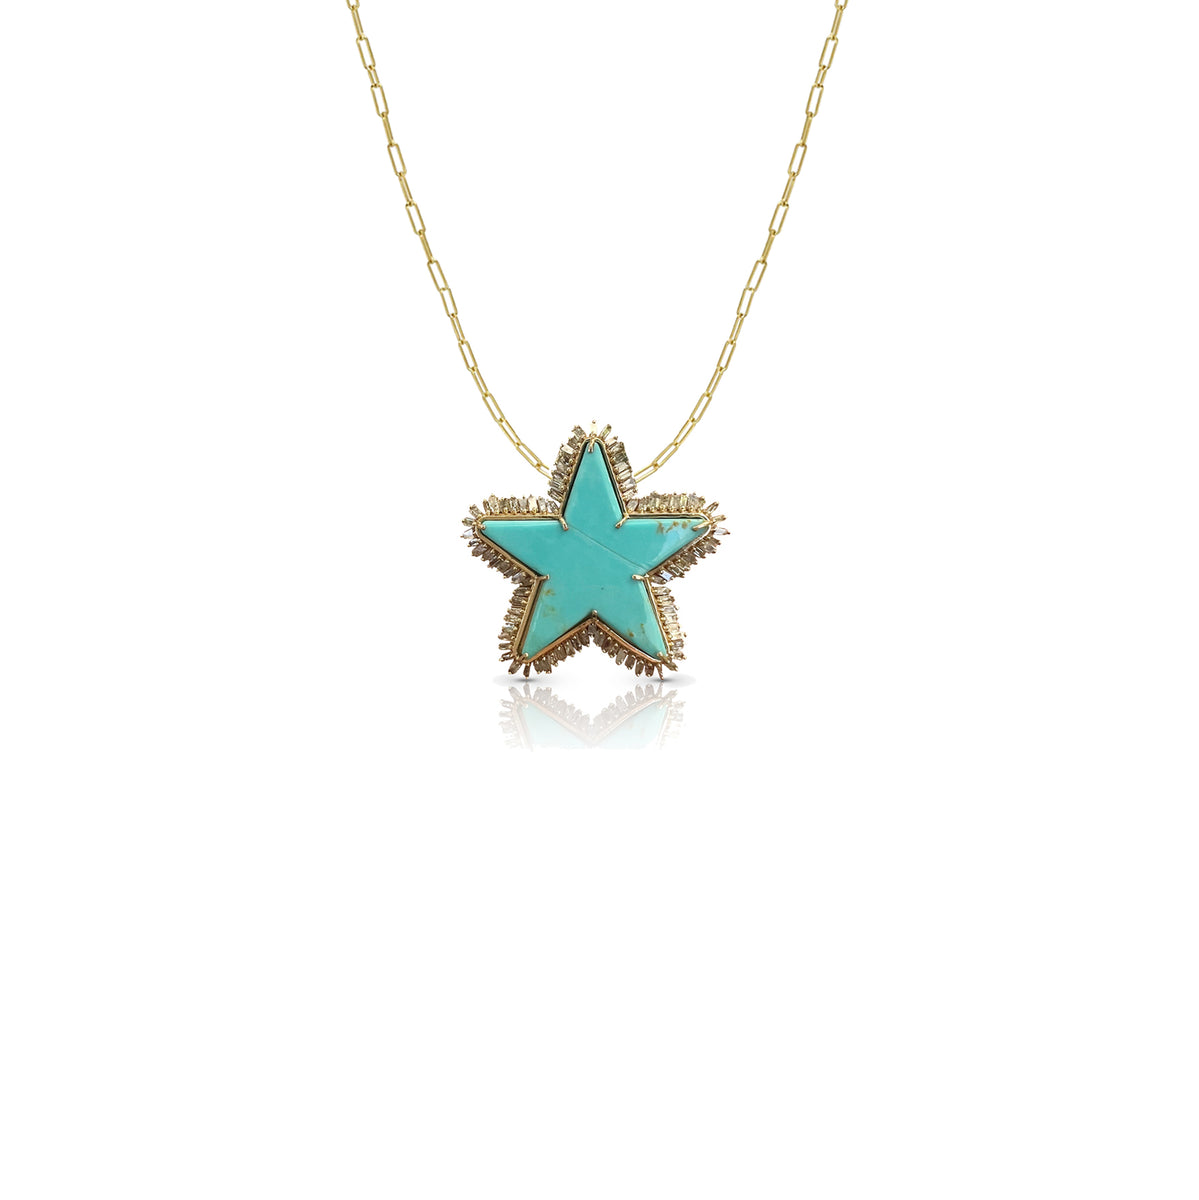 14k Turquoise Star Charm Necklace on Sale